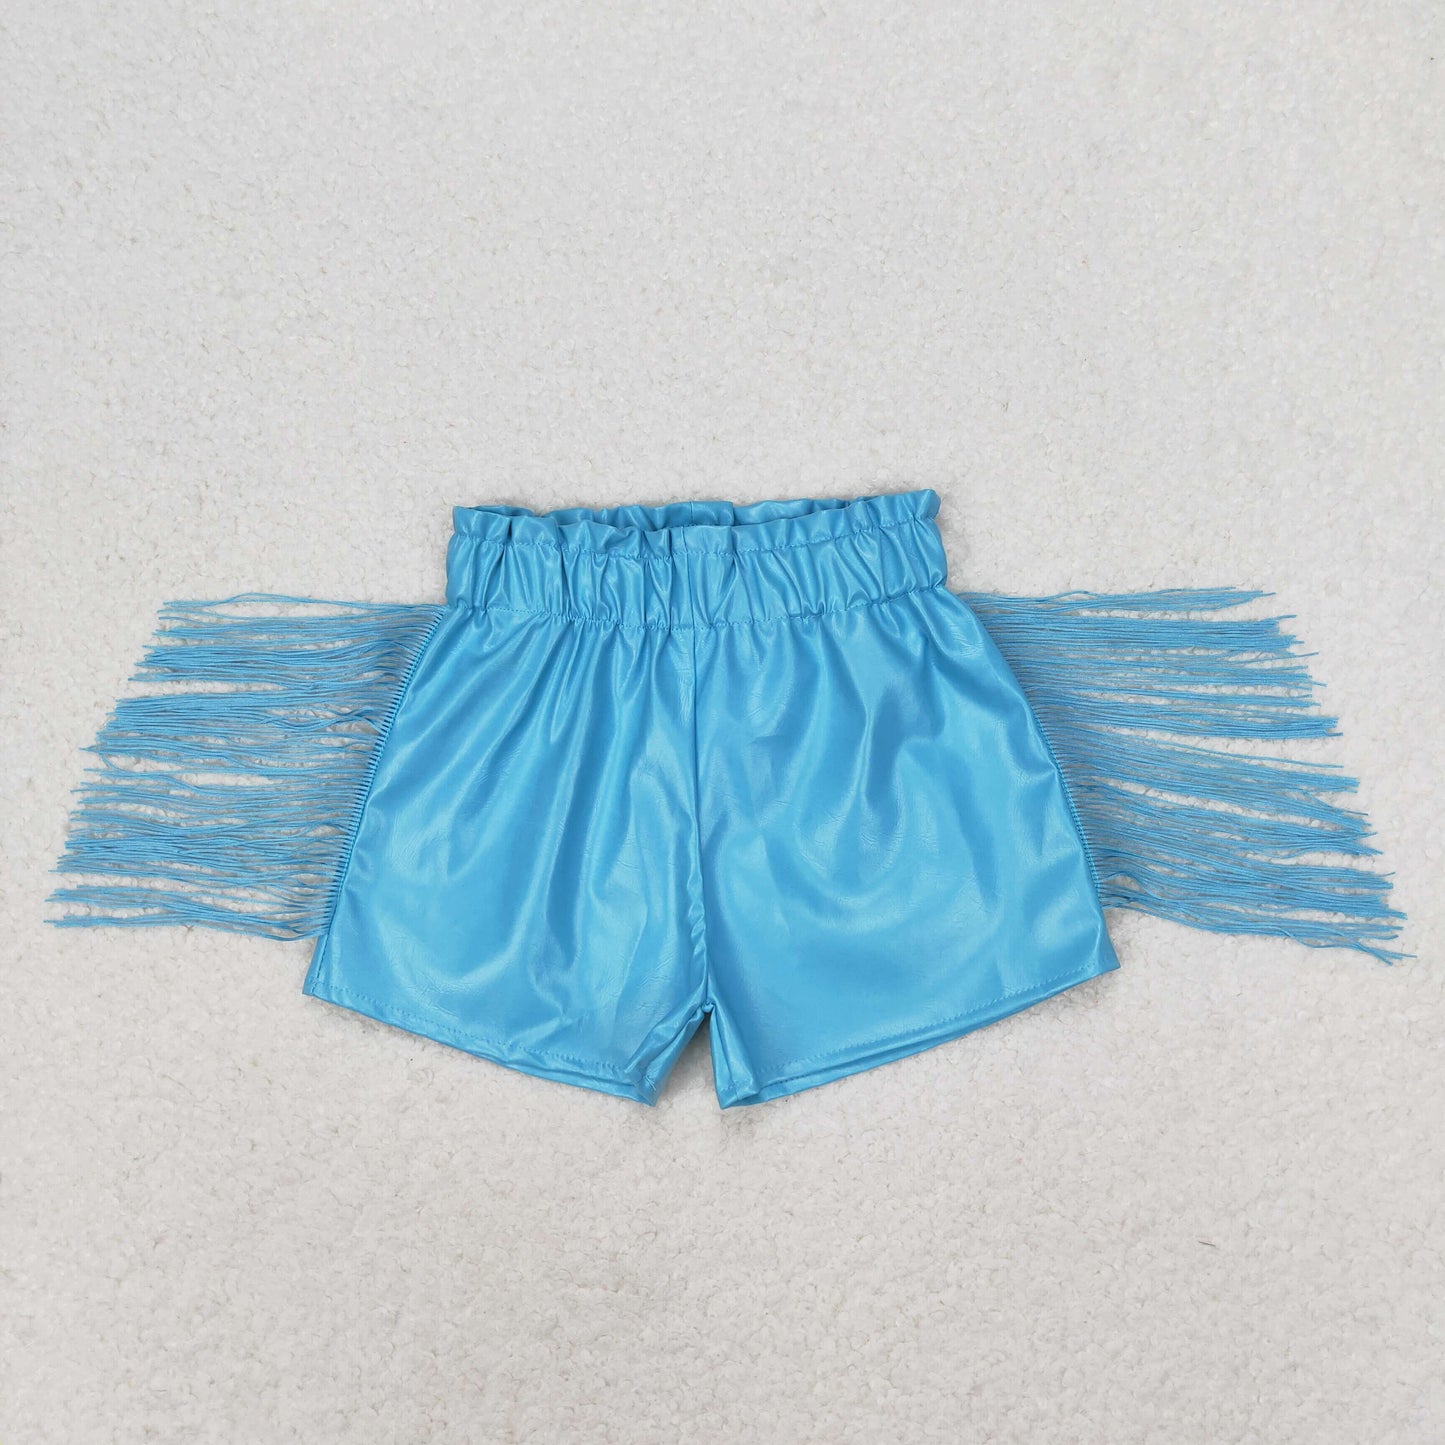 7 Colors Leather Tassel Girls Summer Shorts Sisters Wear